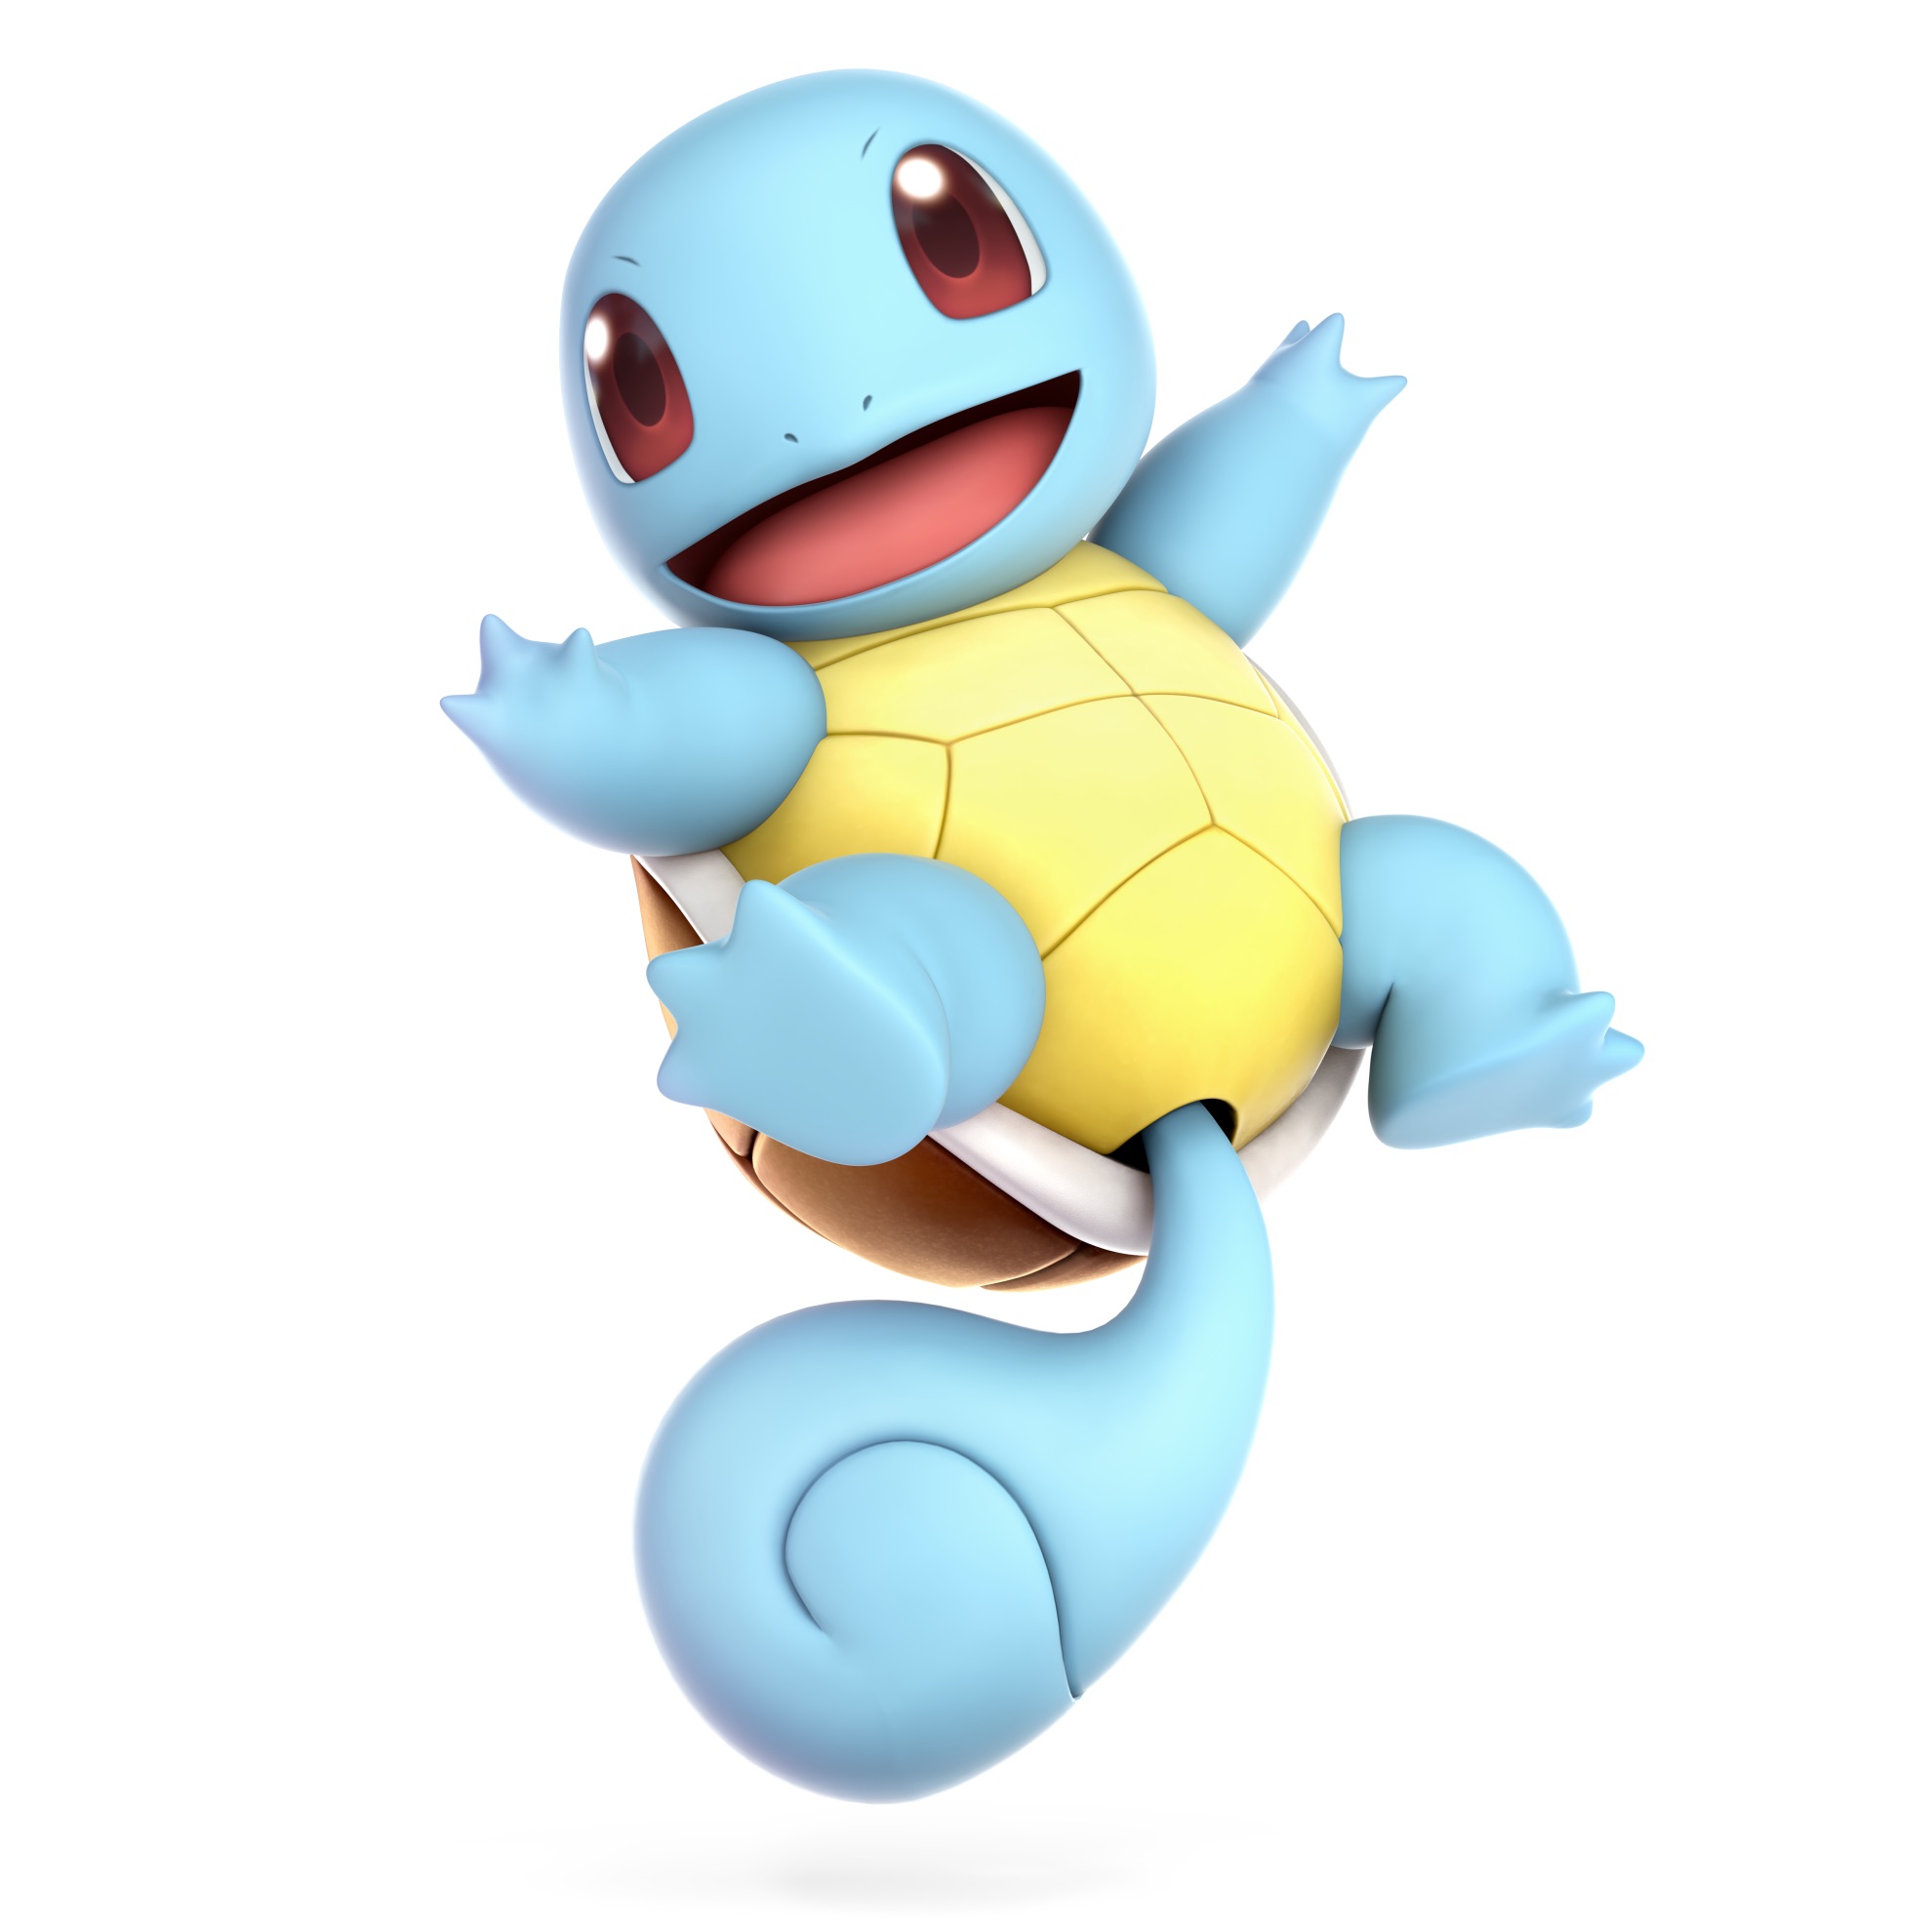 Squirtle Super Smash Bros. Ultimate Character Render